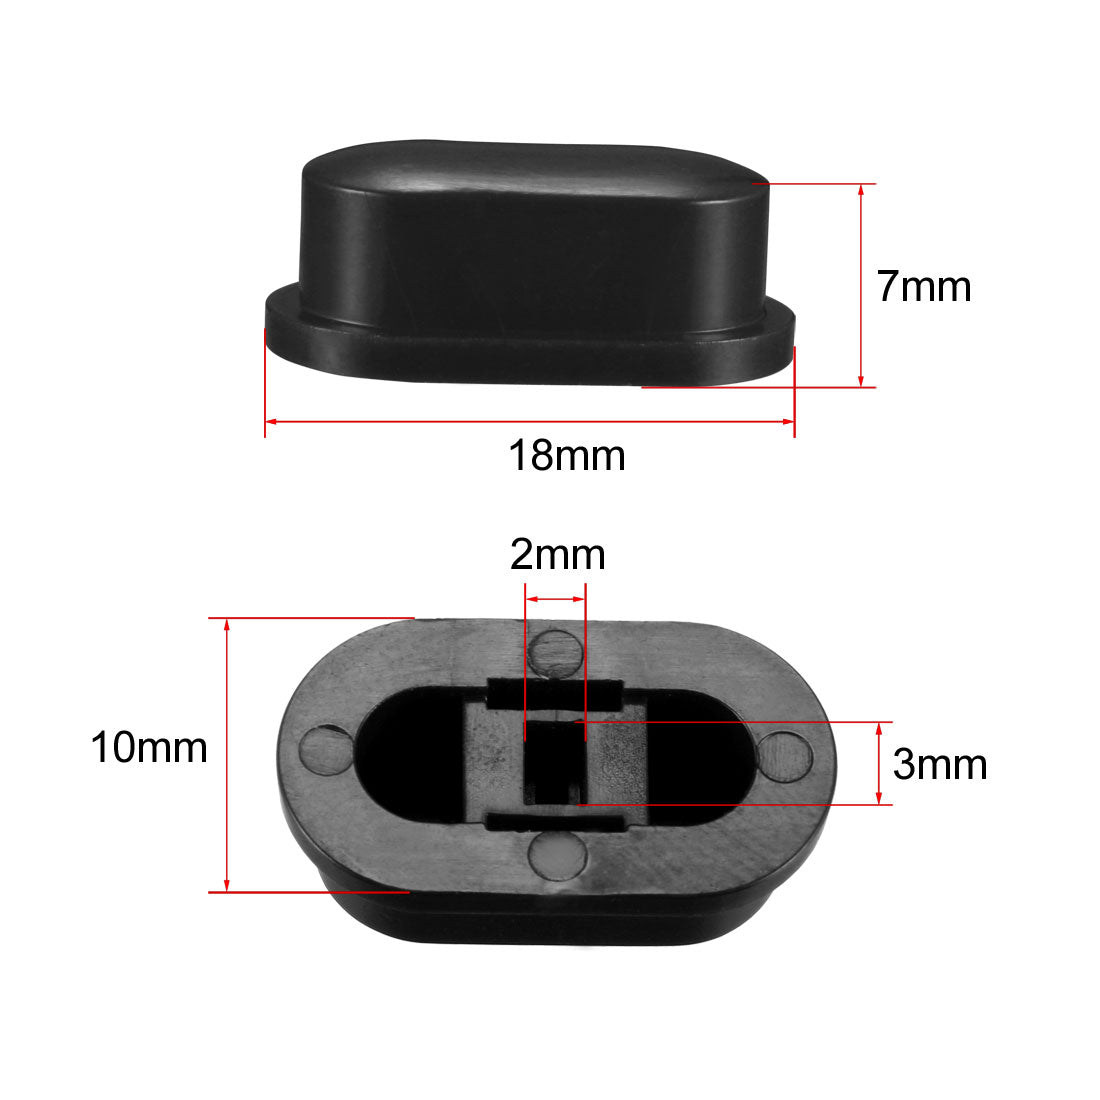 uxcell Uxcell 25Pcs Plastic 18x10x7mm Latching Pushbutton Tactile Switch Caps Cover Keycaps Protector Black